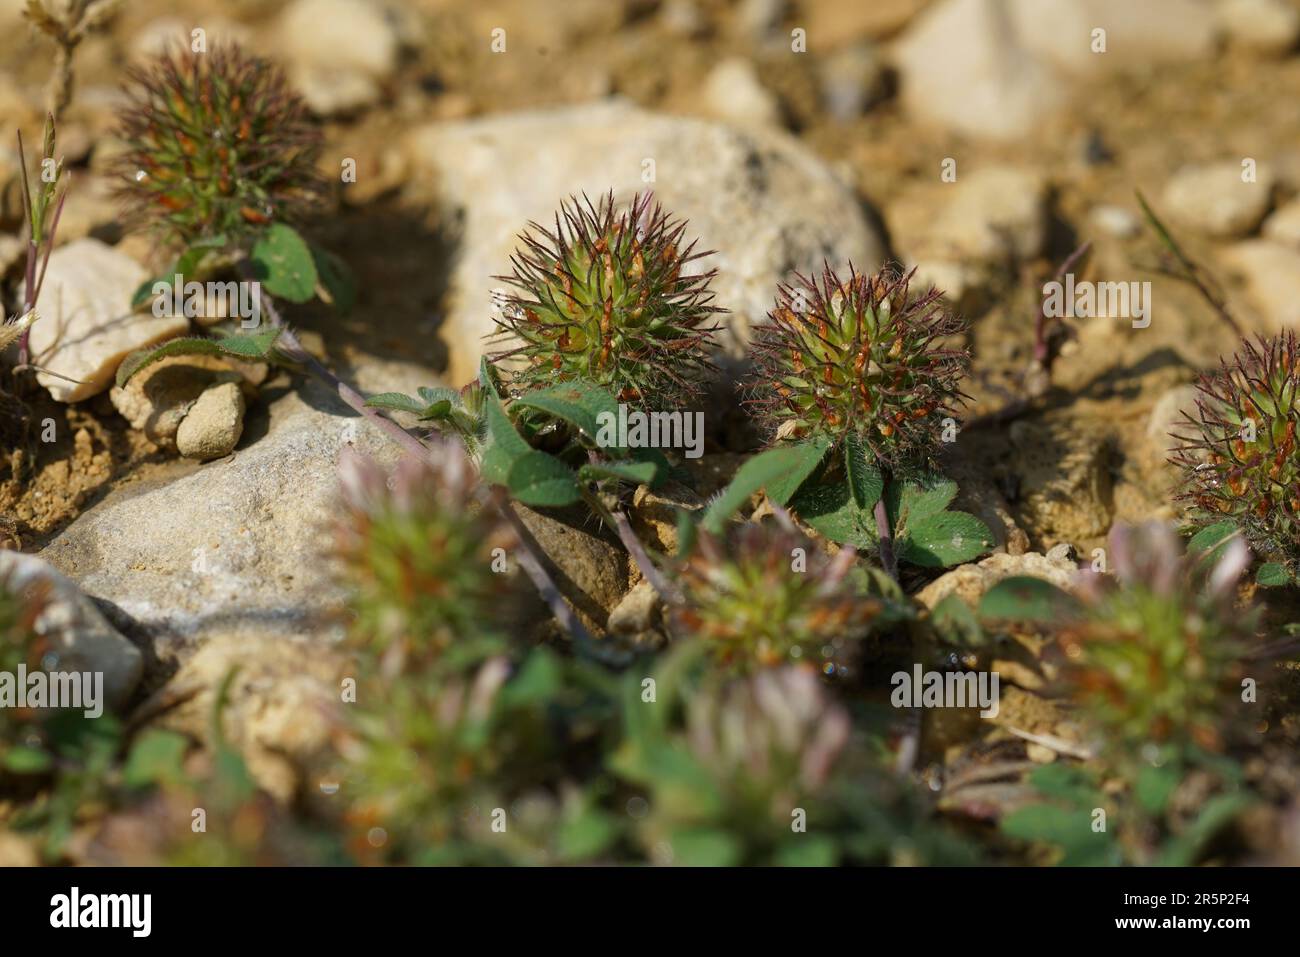 Natural closeup on the Burdock Clover, Trifolium lappaceum growing on the ground Stock Photo